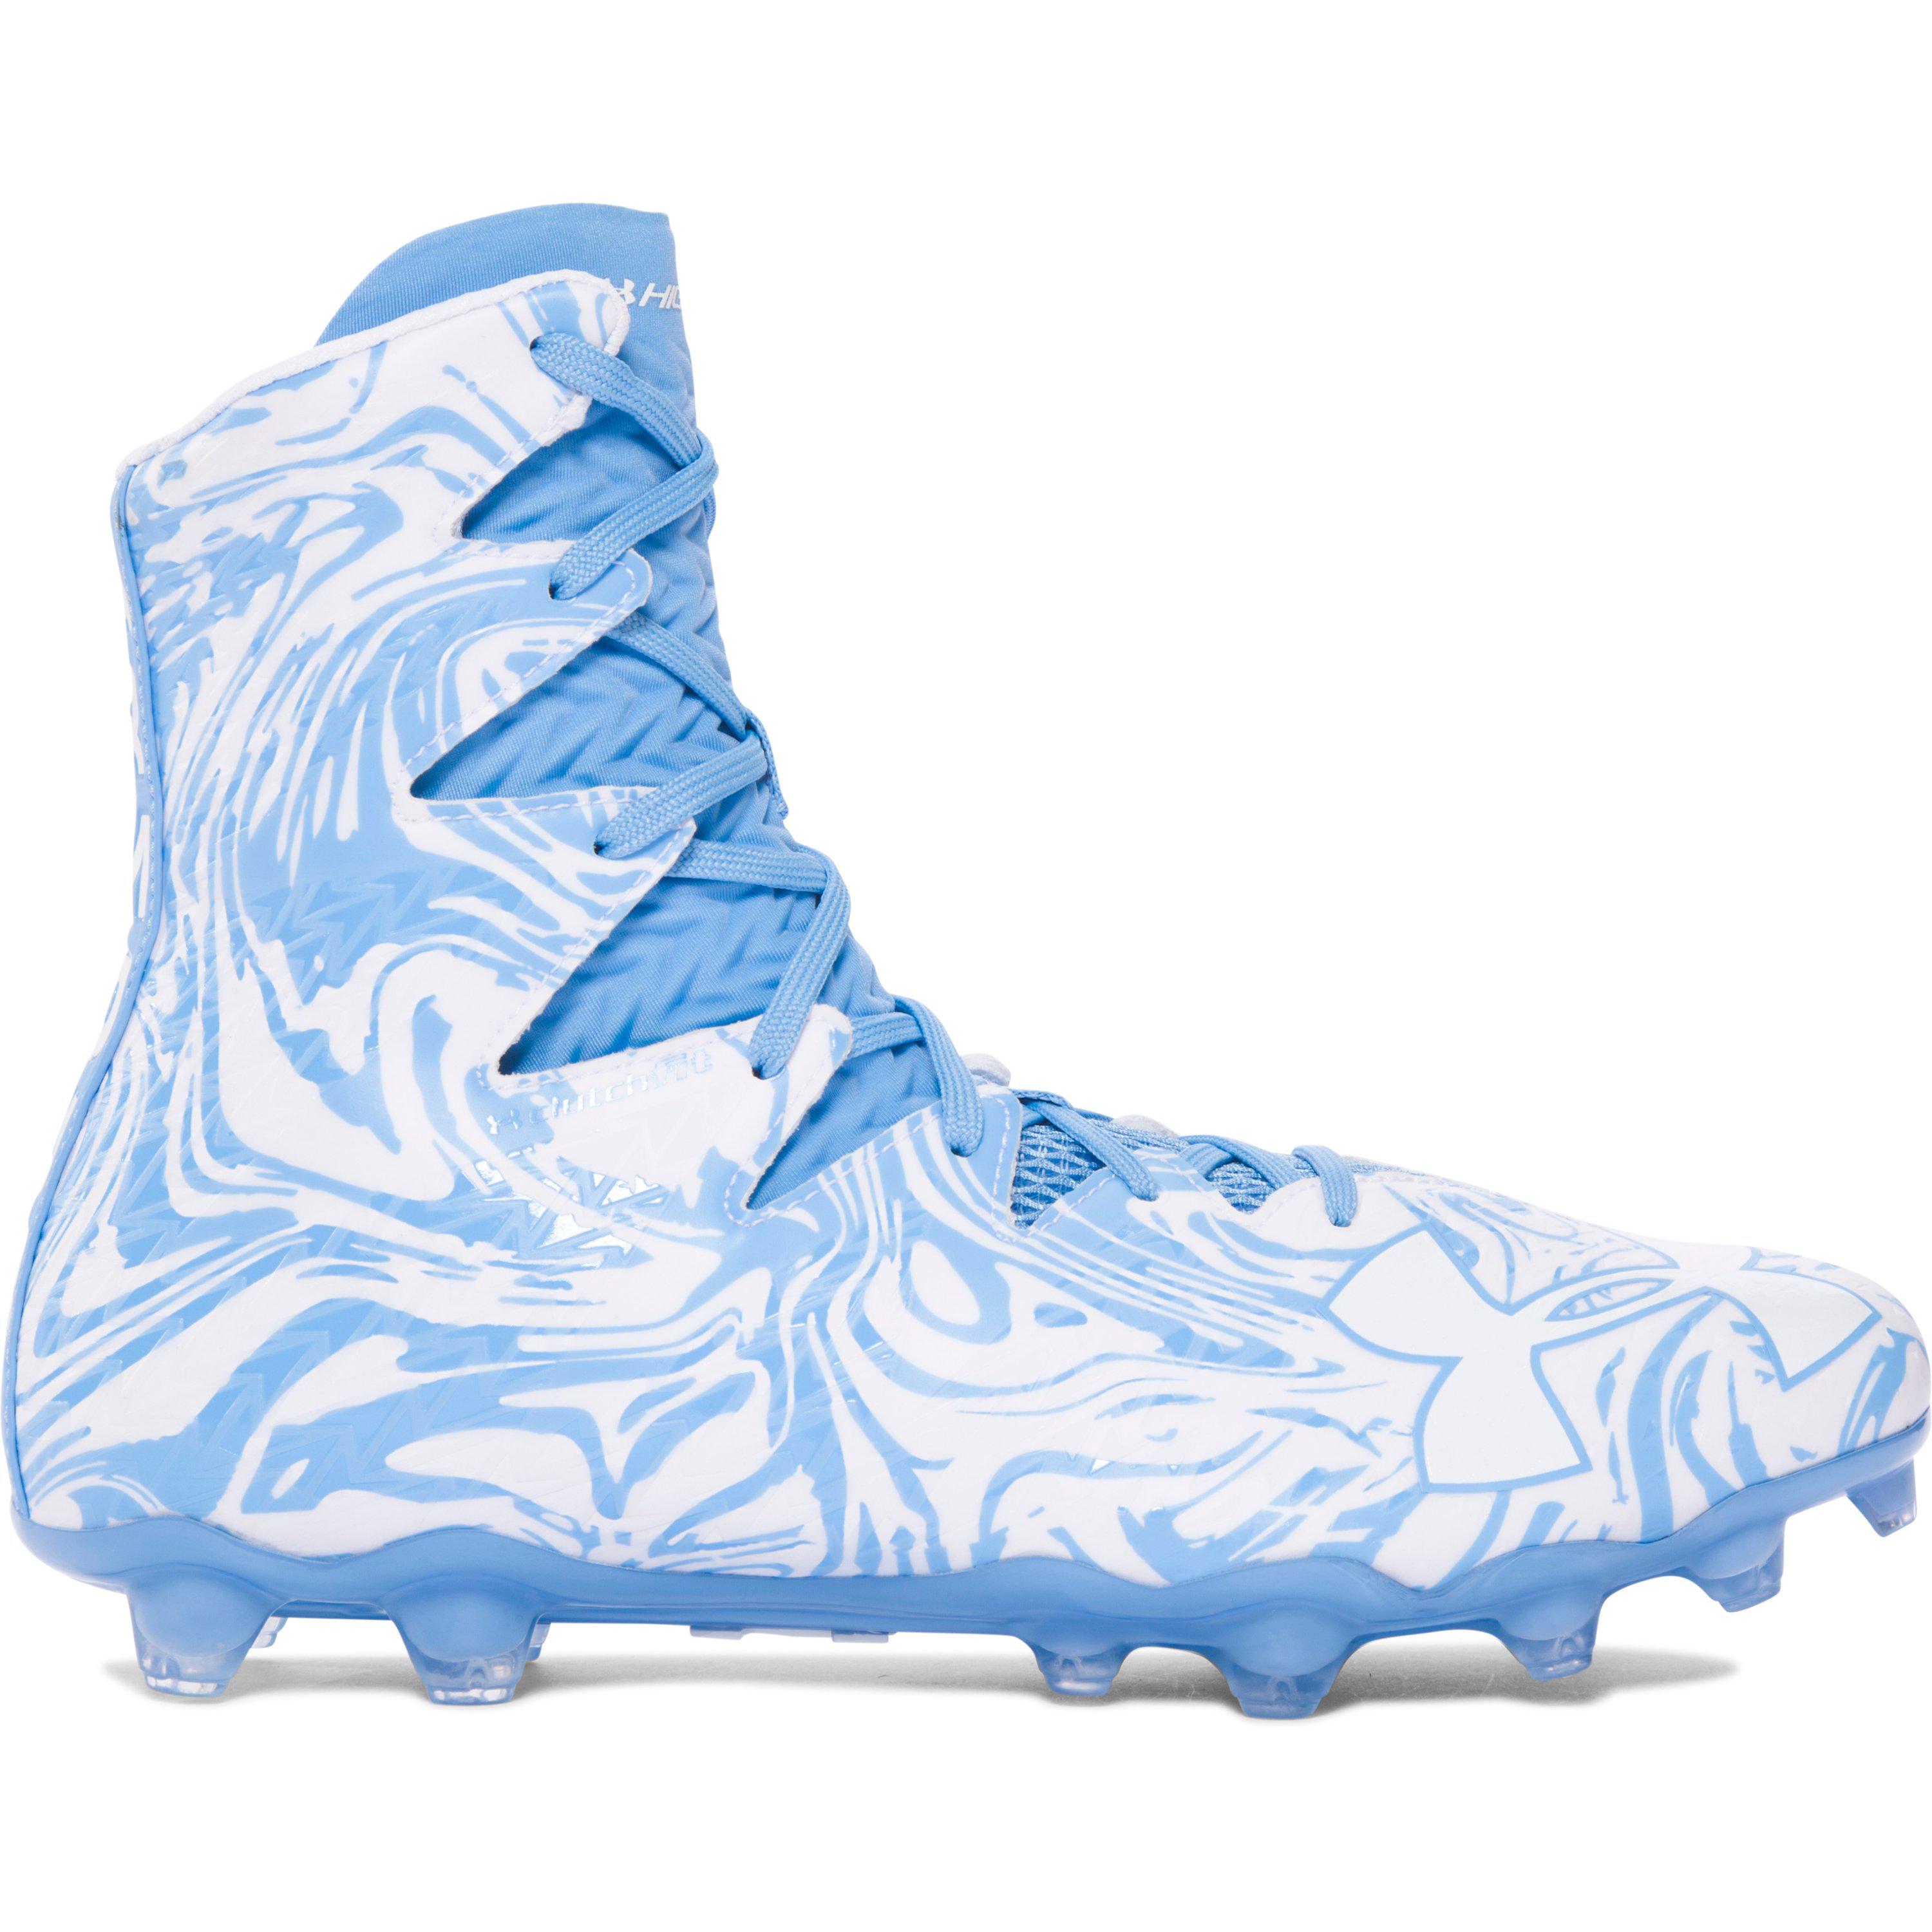 blue and white under armour cleats